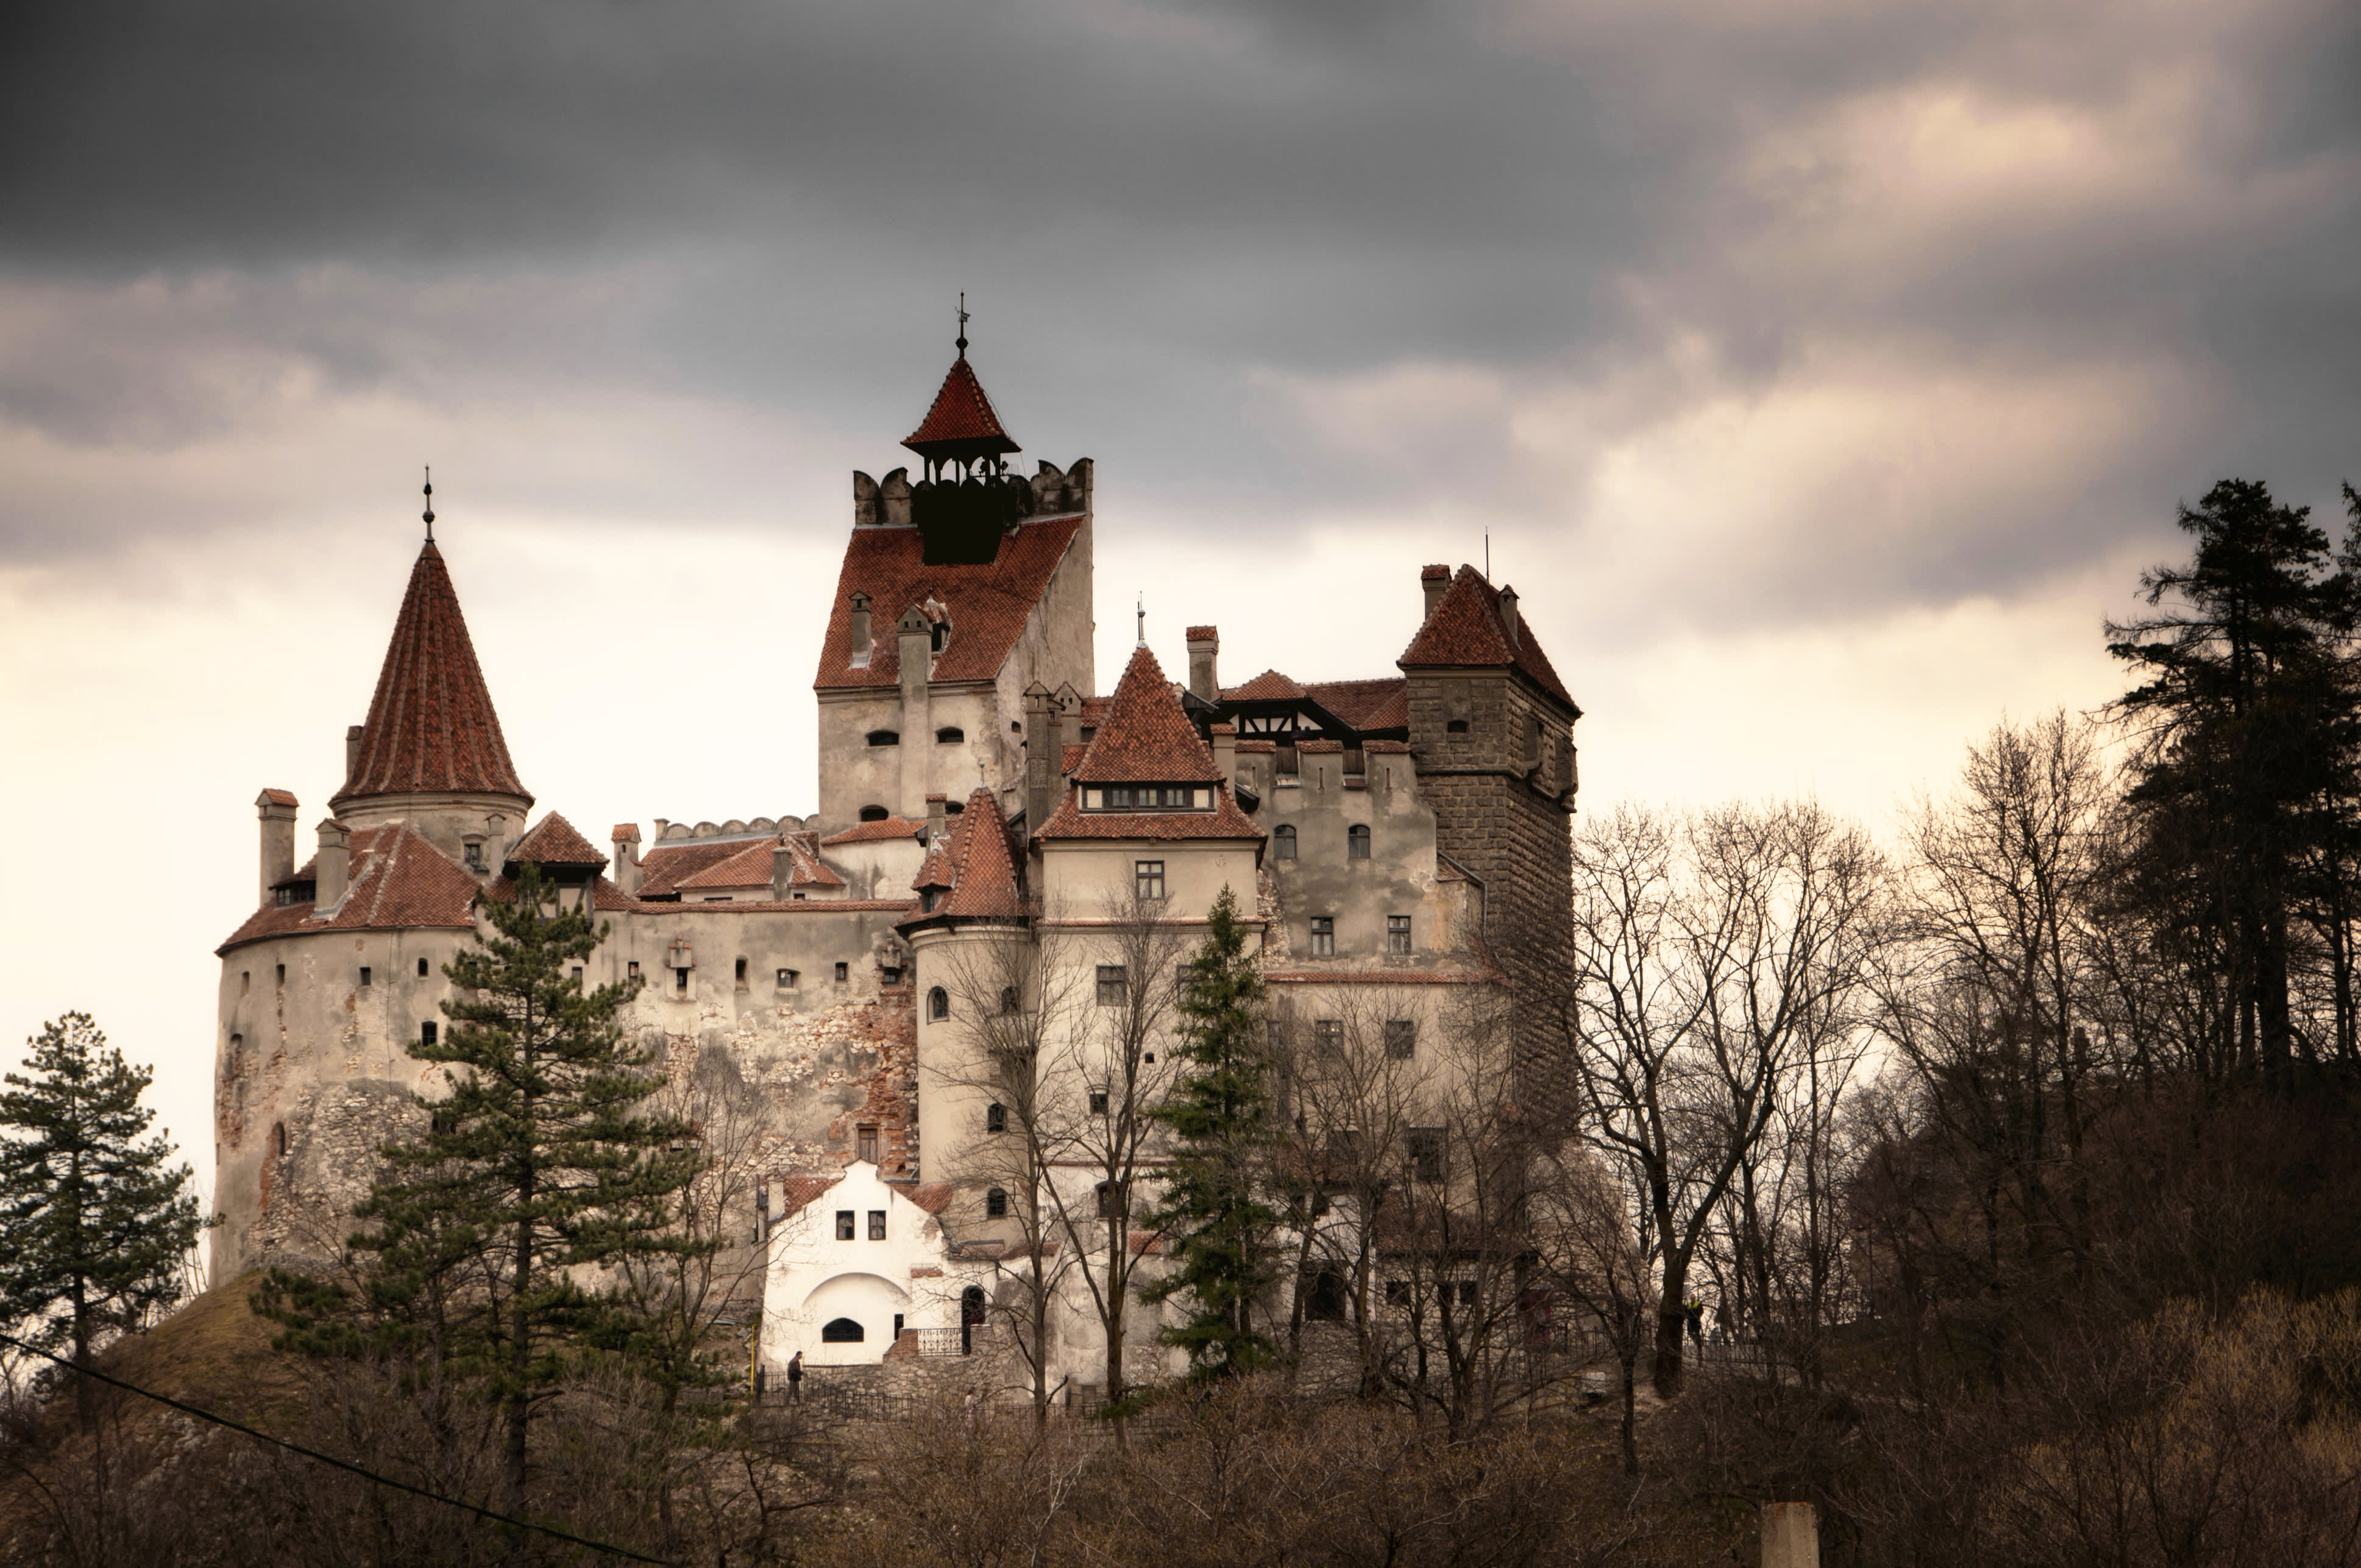 Now you can own Dracula's castle